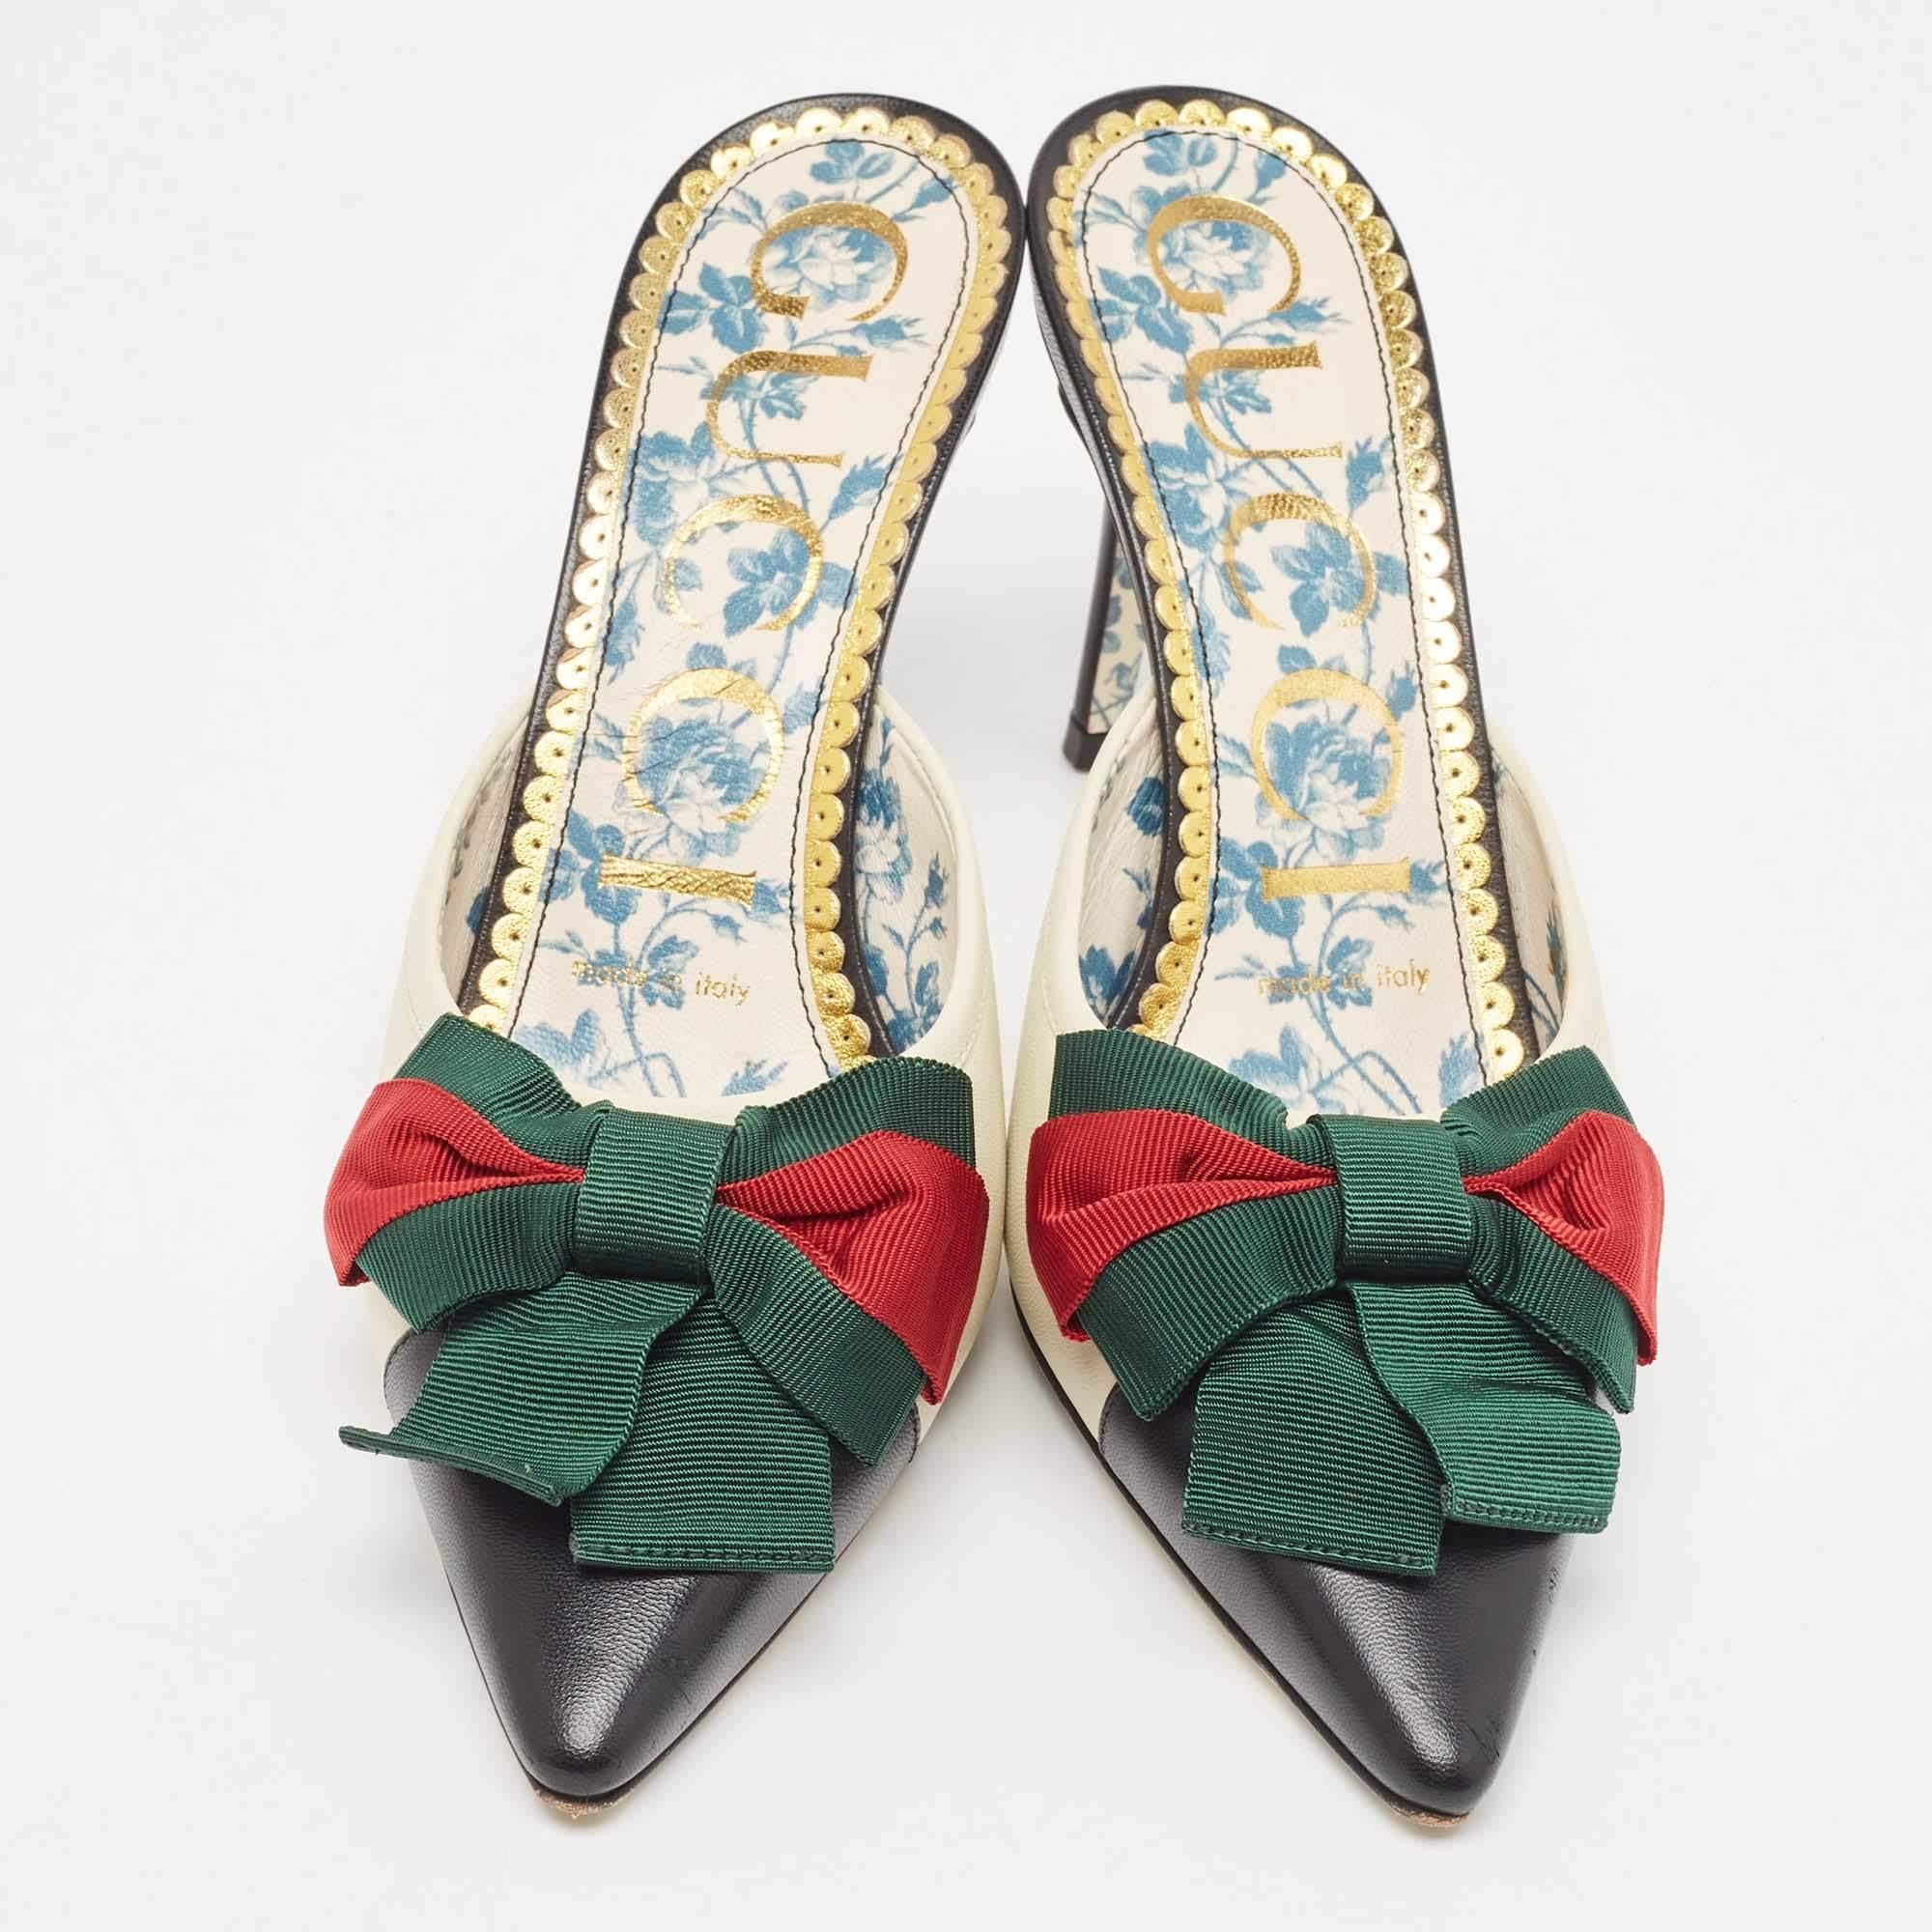 Complement your well-put-together outfit with these authentic Gucci heels. Timeless and classy, they have an amazing construction for enduring quality and comfortable fit.

Includes: Original Dustbag

